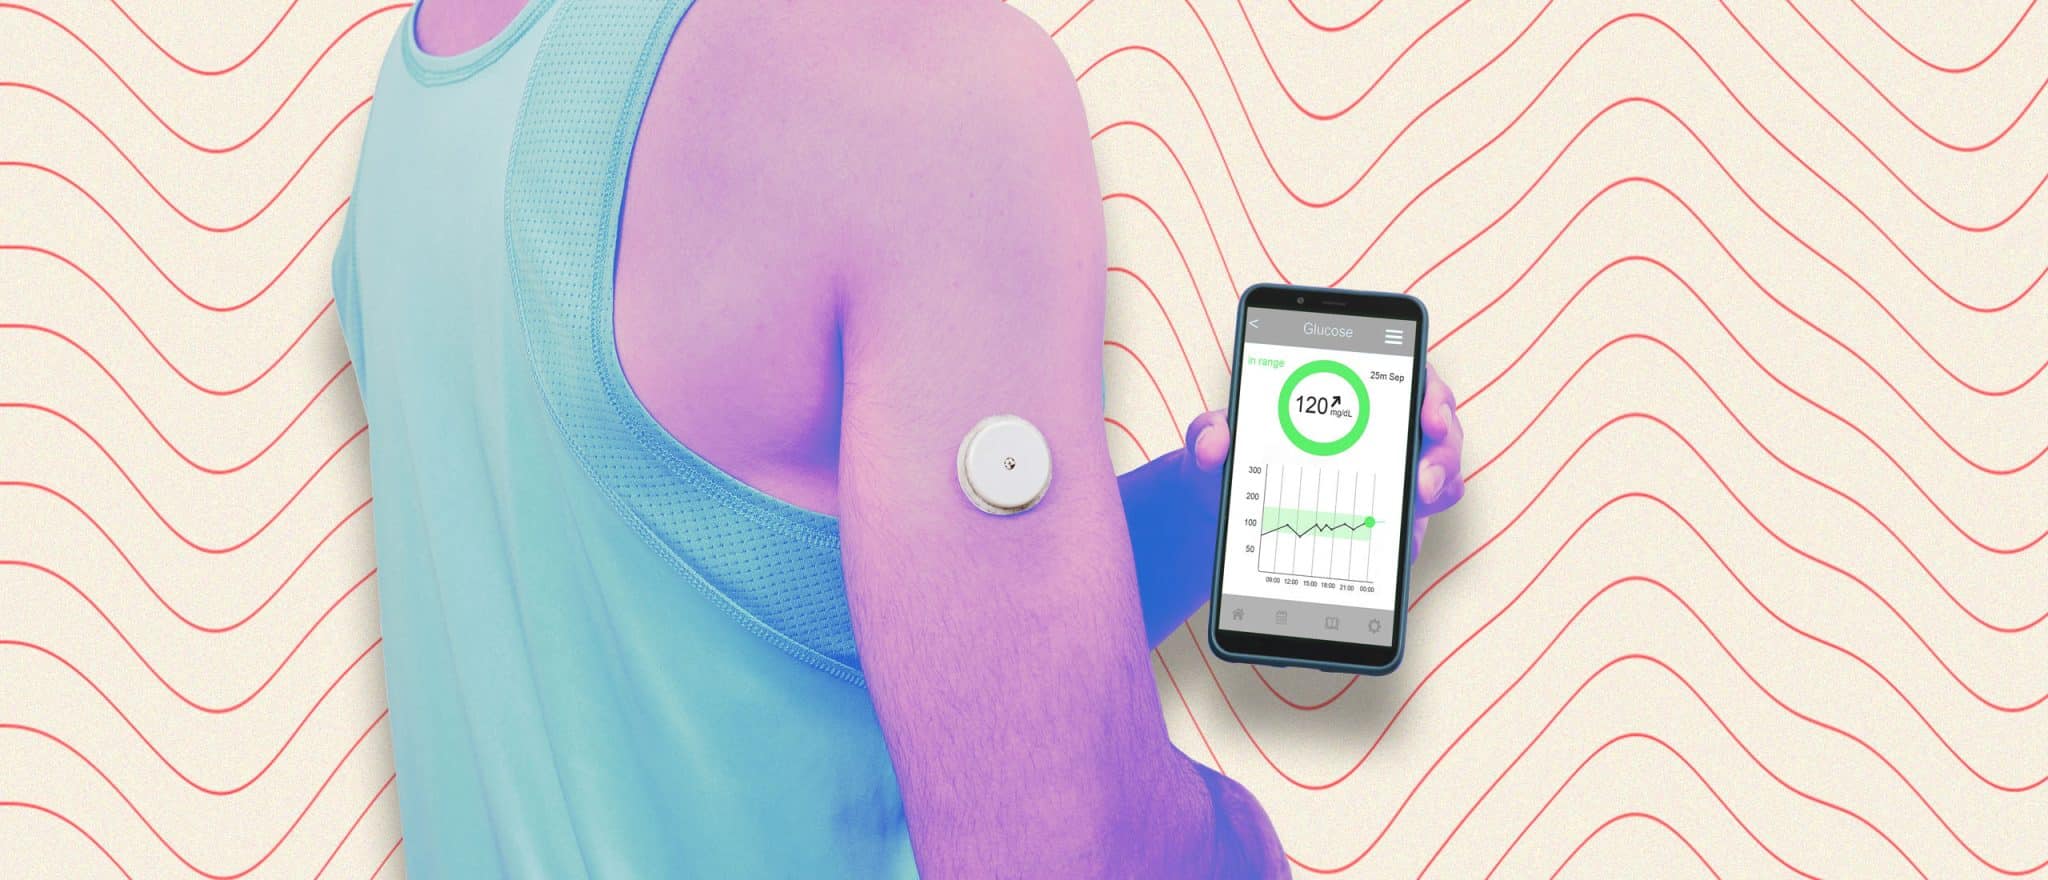 Why Wearing a CGM Could Help You Live Longer, According to Longevity Experts